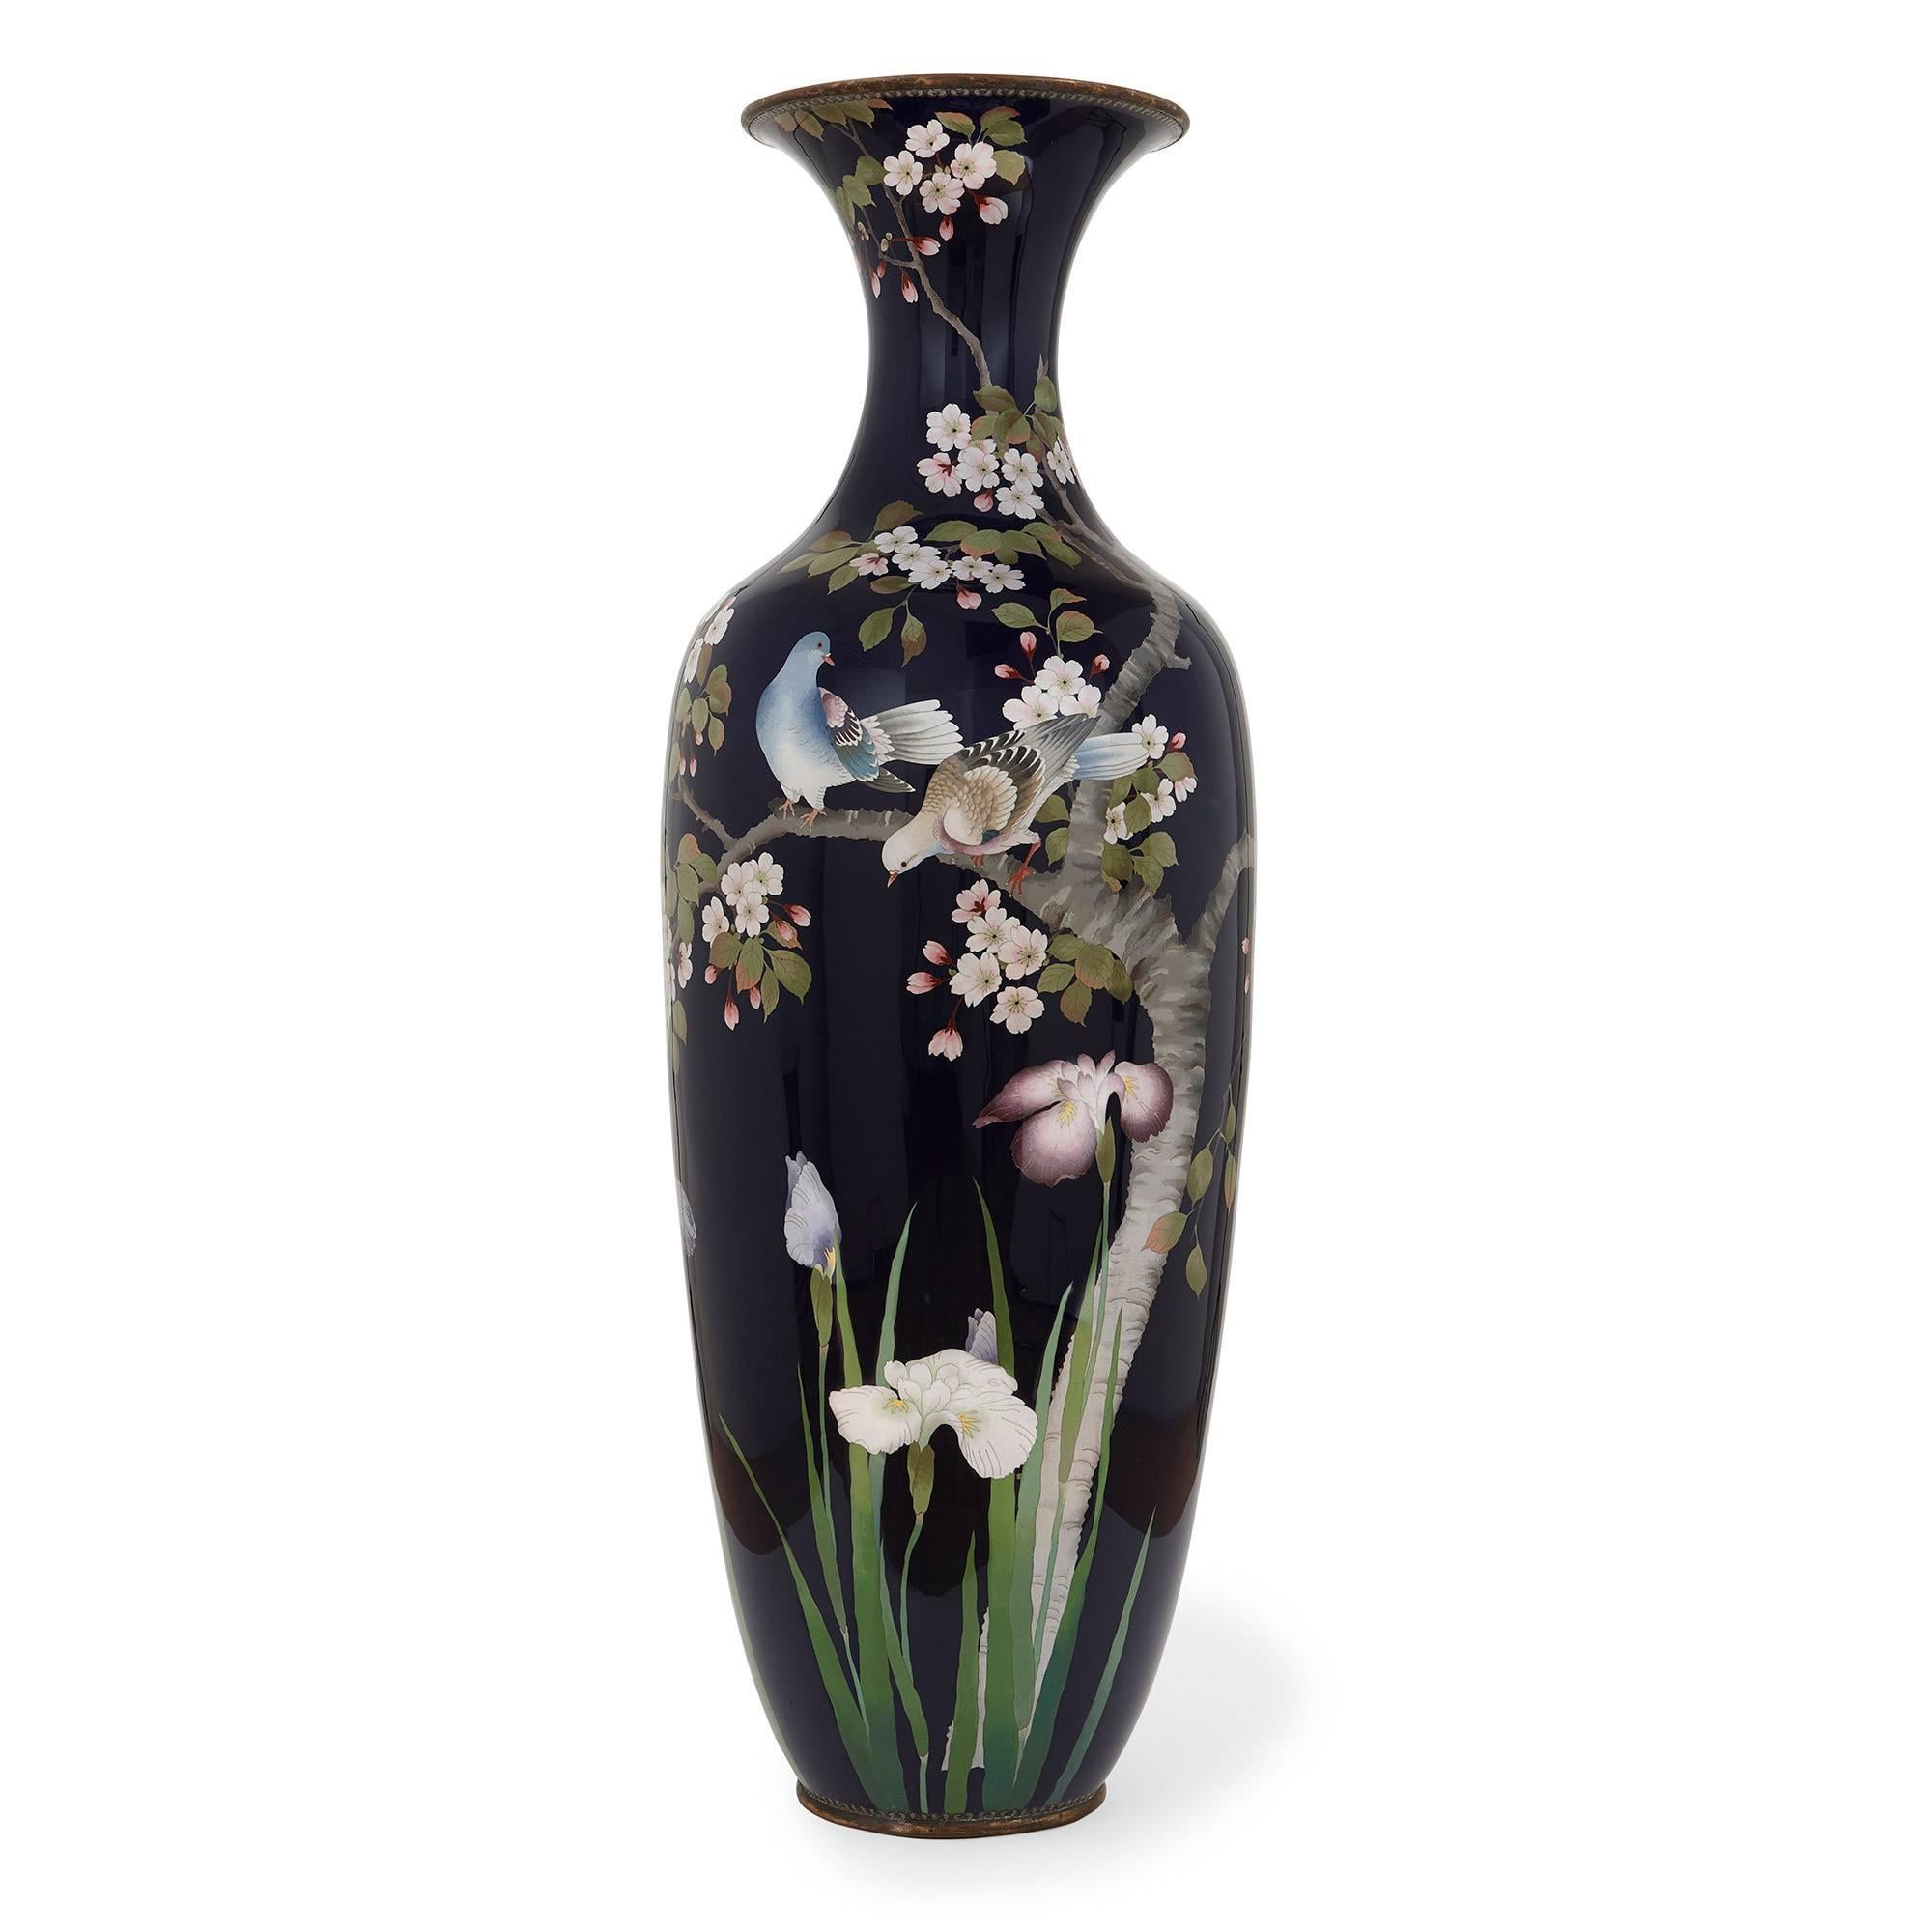 Vase of ovoid form, finely decorated with iris flowers, trees and birds.